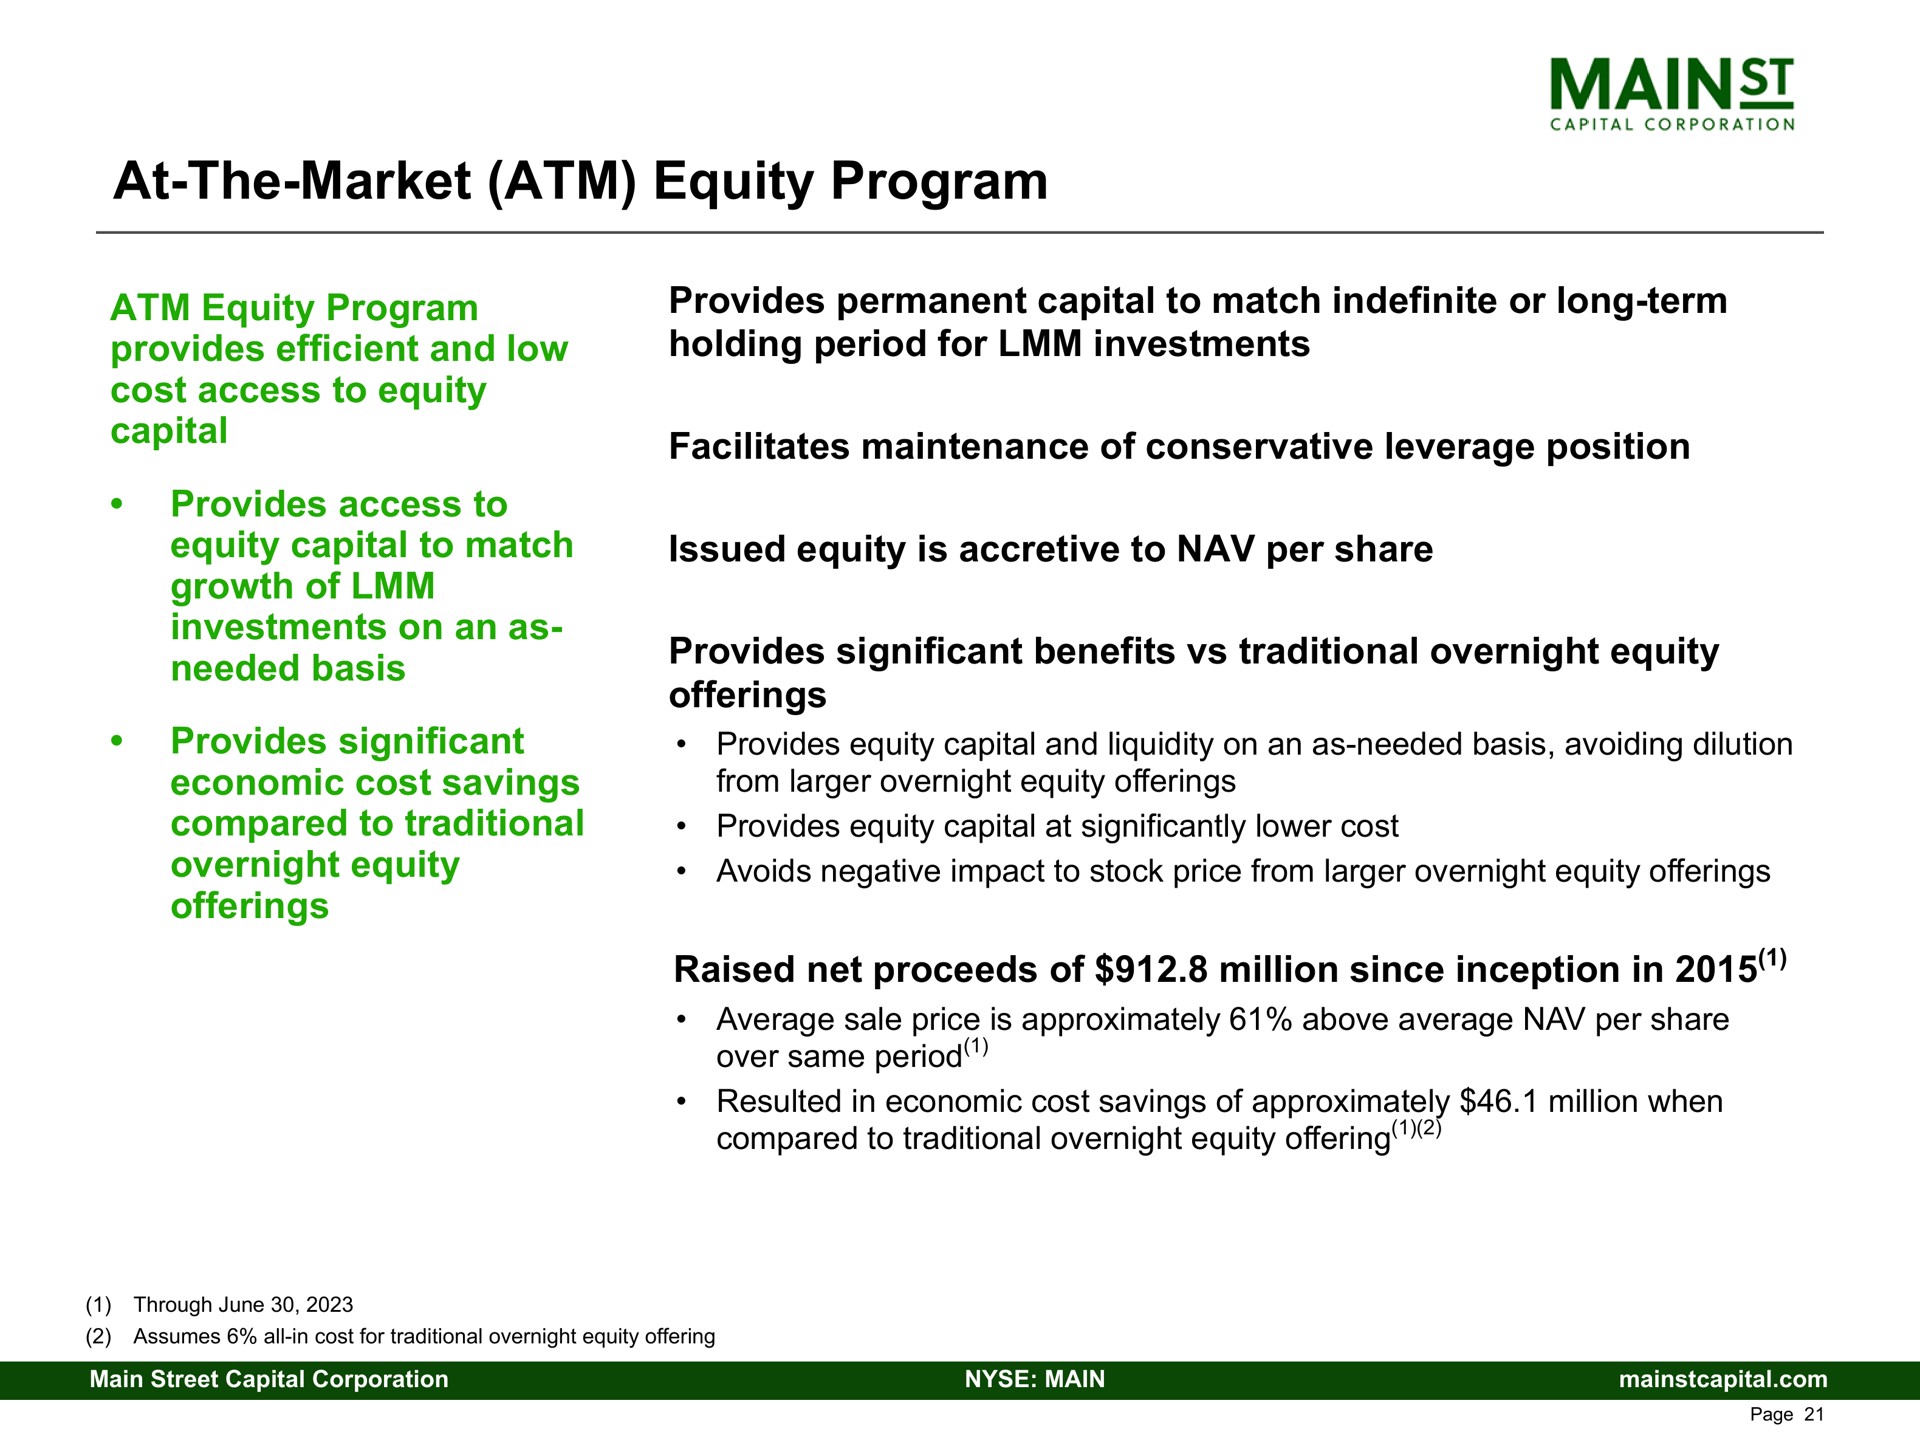 at the market equity program equity program provides efficient and low cost access to equity capital provides access to equity capital to match growth of investments on an as needed basis provides significant economic cost savings compared to traditional overnight equity offerings provides permanent capital to match indefinite or long term holding period for investments facilitates maintenance of conservative leverage position issued equity is accretive to per share provides significant benefits traditional overnight equity offerings raised net proceeds of million since inception in | Main Street Capital